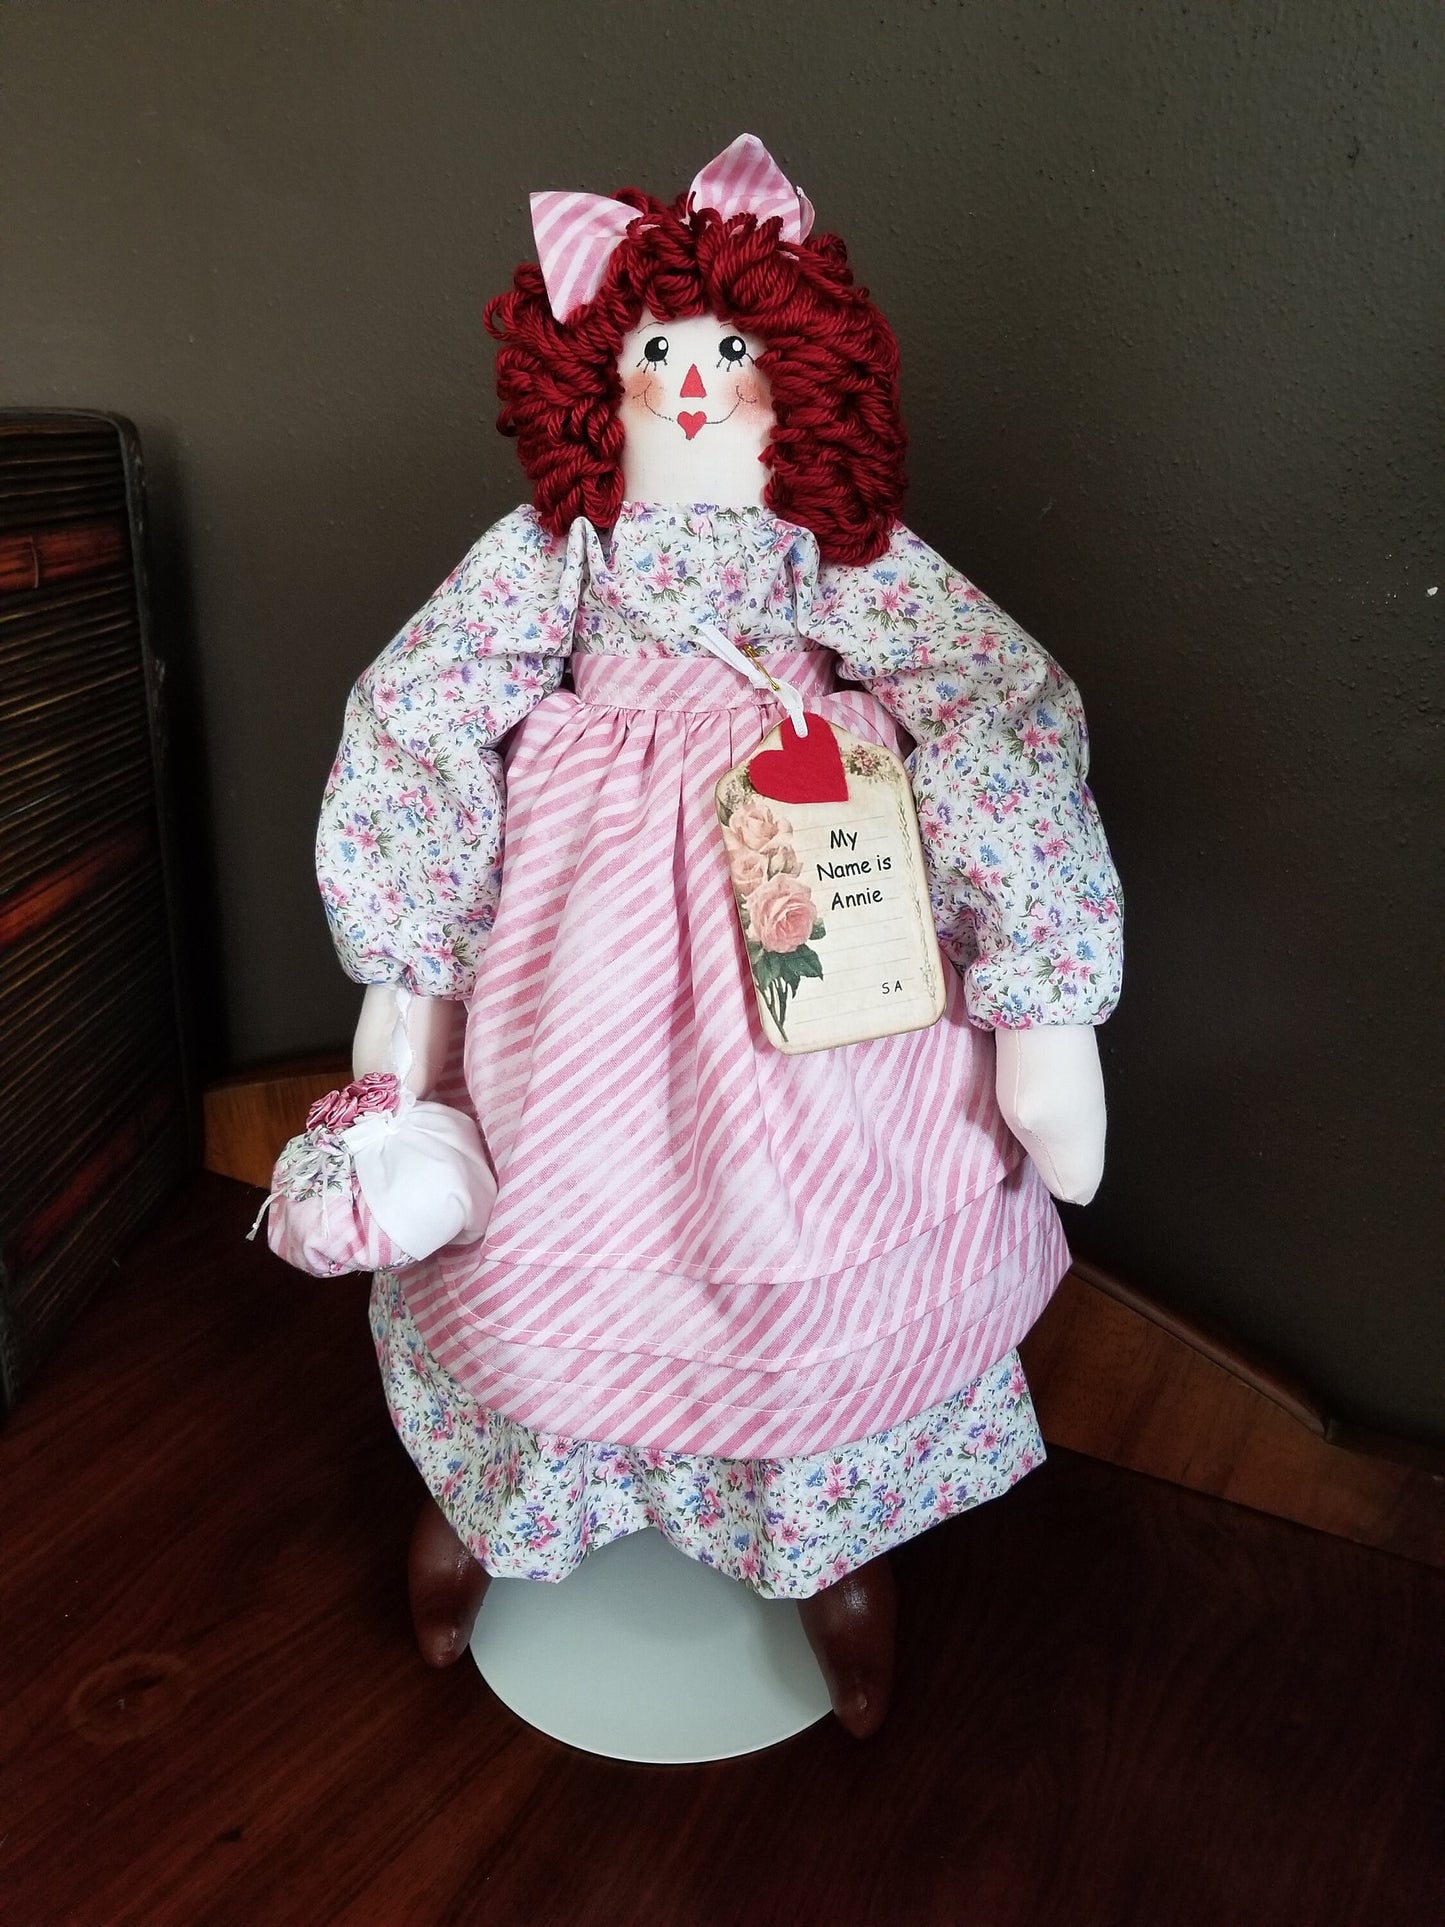 Handmade Annie doll with pink striped handbag. Limited Edition Series by Sunnie Andress